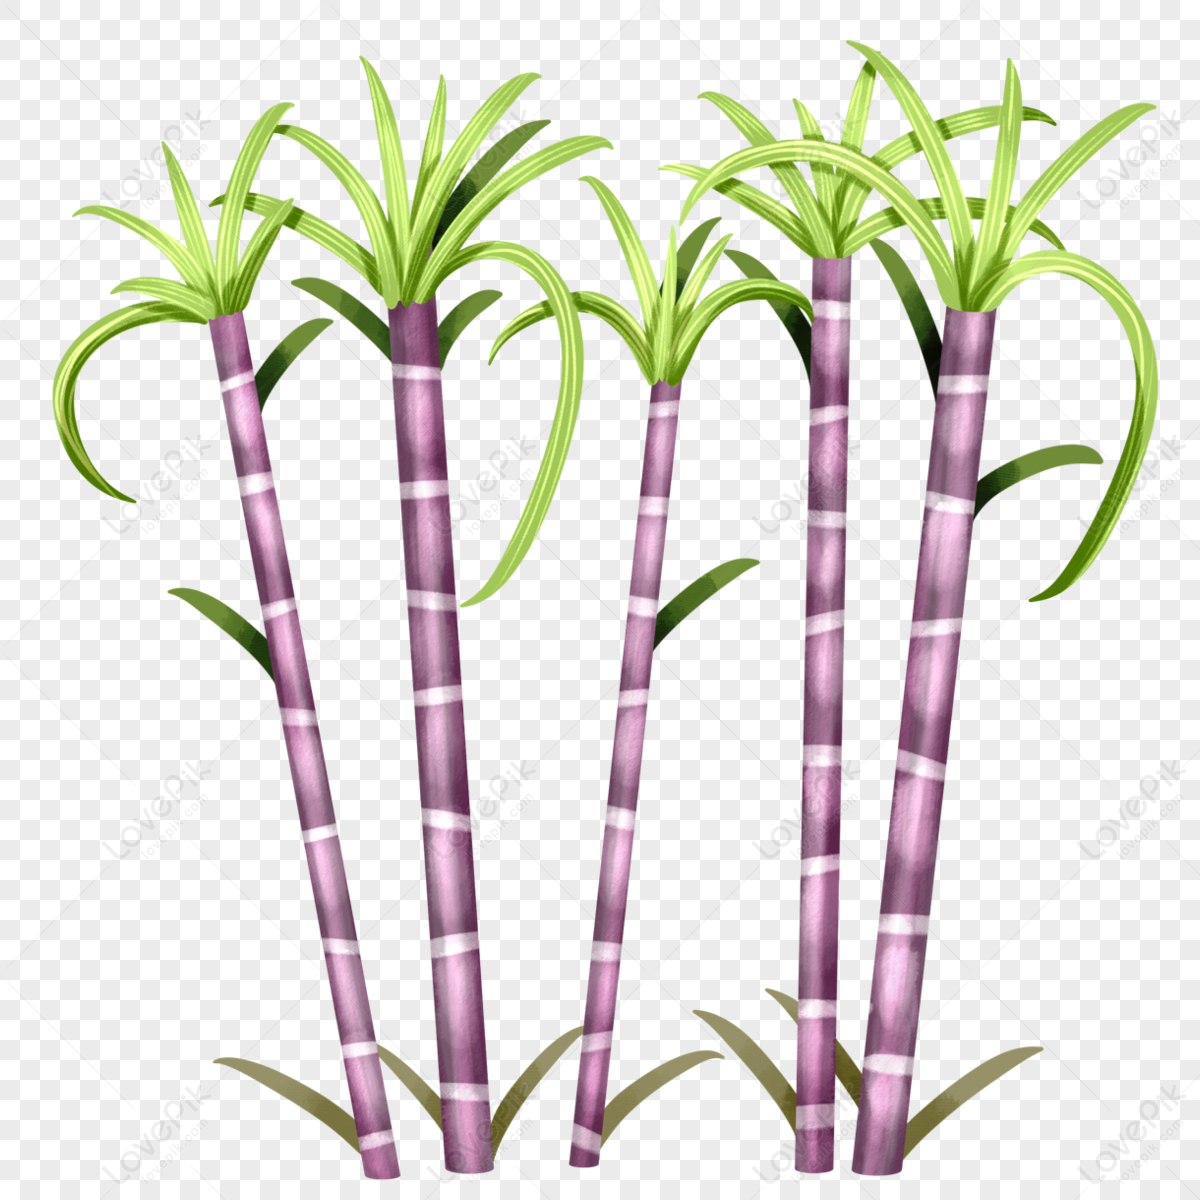 Sugar Cane Plant Leaves Sketch Vector Illustration Natural Organic  Sweetener Stock Vector by ©QualitDesugn 419054646